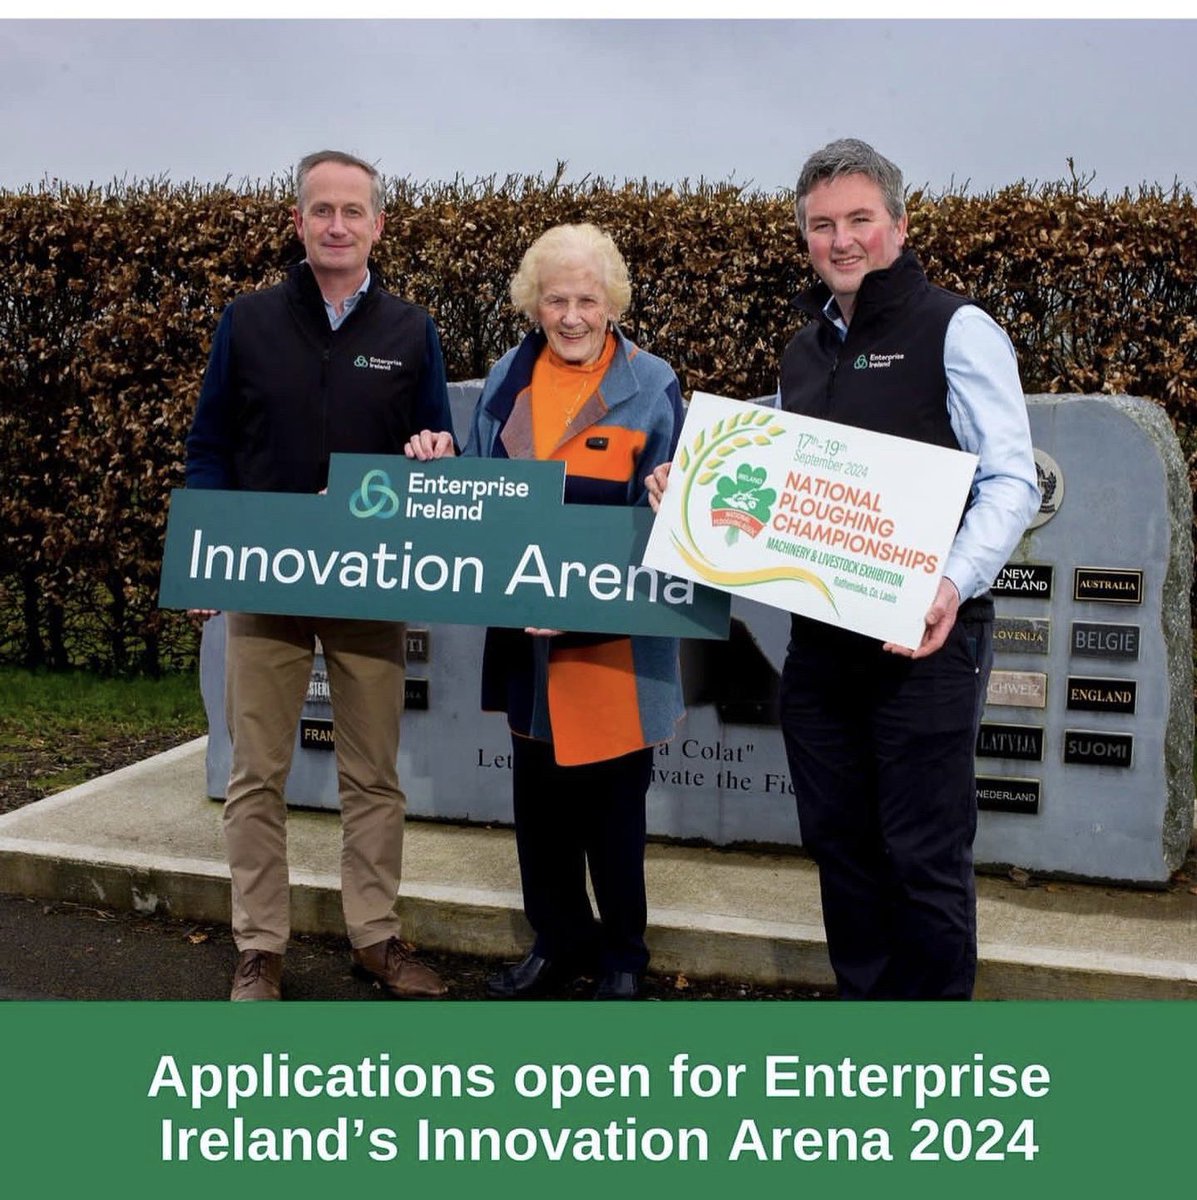 Launch of the @Entirl Innovation Arena Awards at #Ploughing2024 to apply please see www.enterprise-ireland/en/innovation-arena @Sundaybusiness1 @businessposthq @RTEbusiness @AgrilandIreland @ucdagfood @LaoisBusinesses @FarmersGuardian @ifac_ireland @ST__Ireland